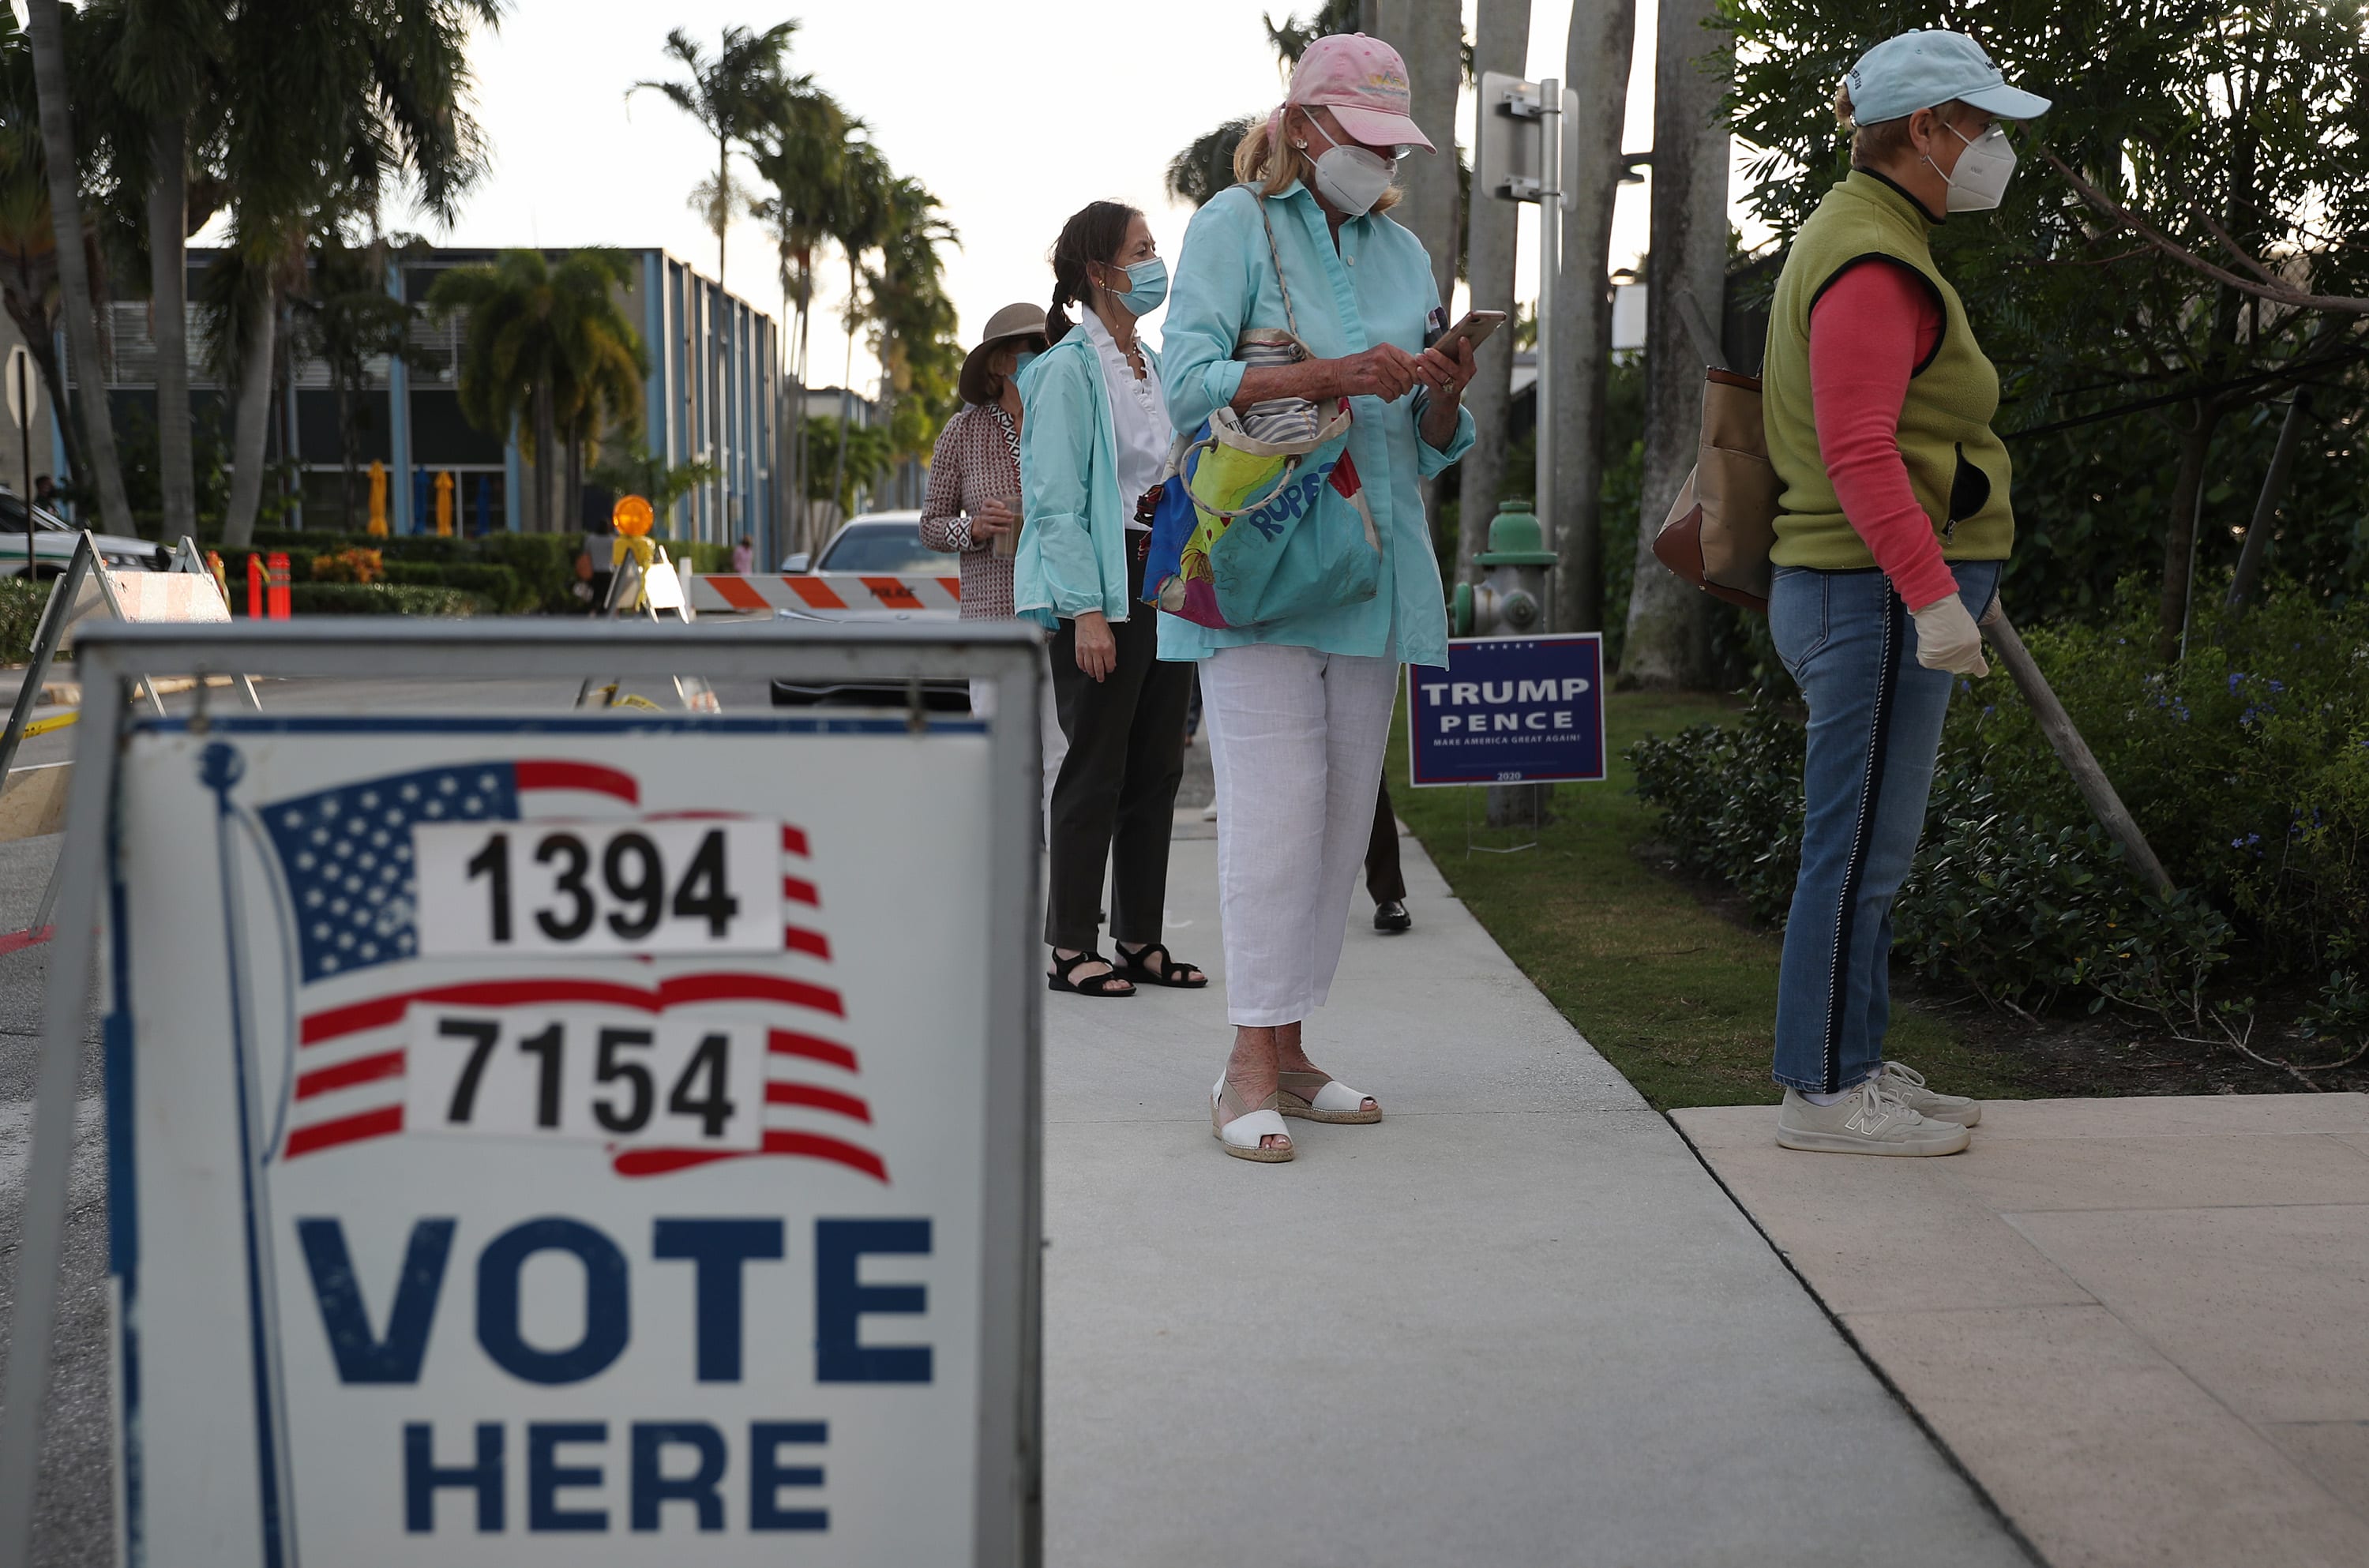 People stand in line to vote at the Morton and Barbara Mandel Recreation Center on November 03, 2020 in Palm Beach, Florida.